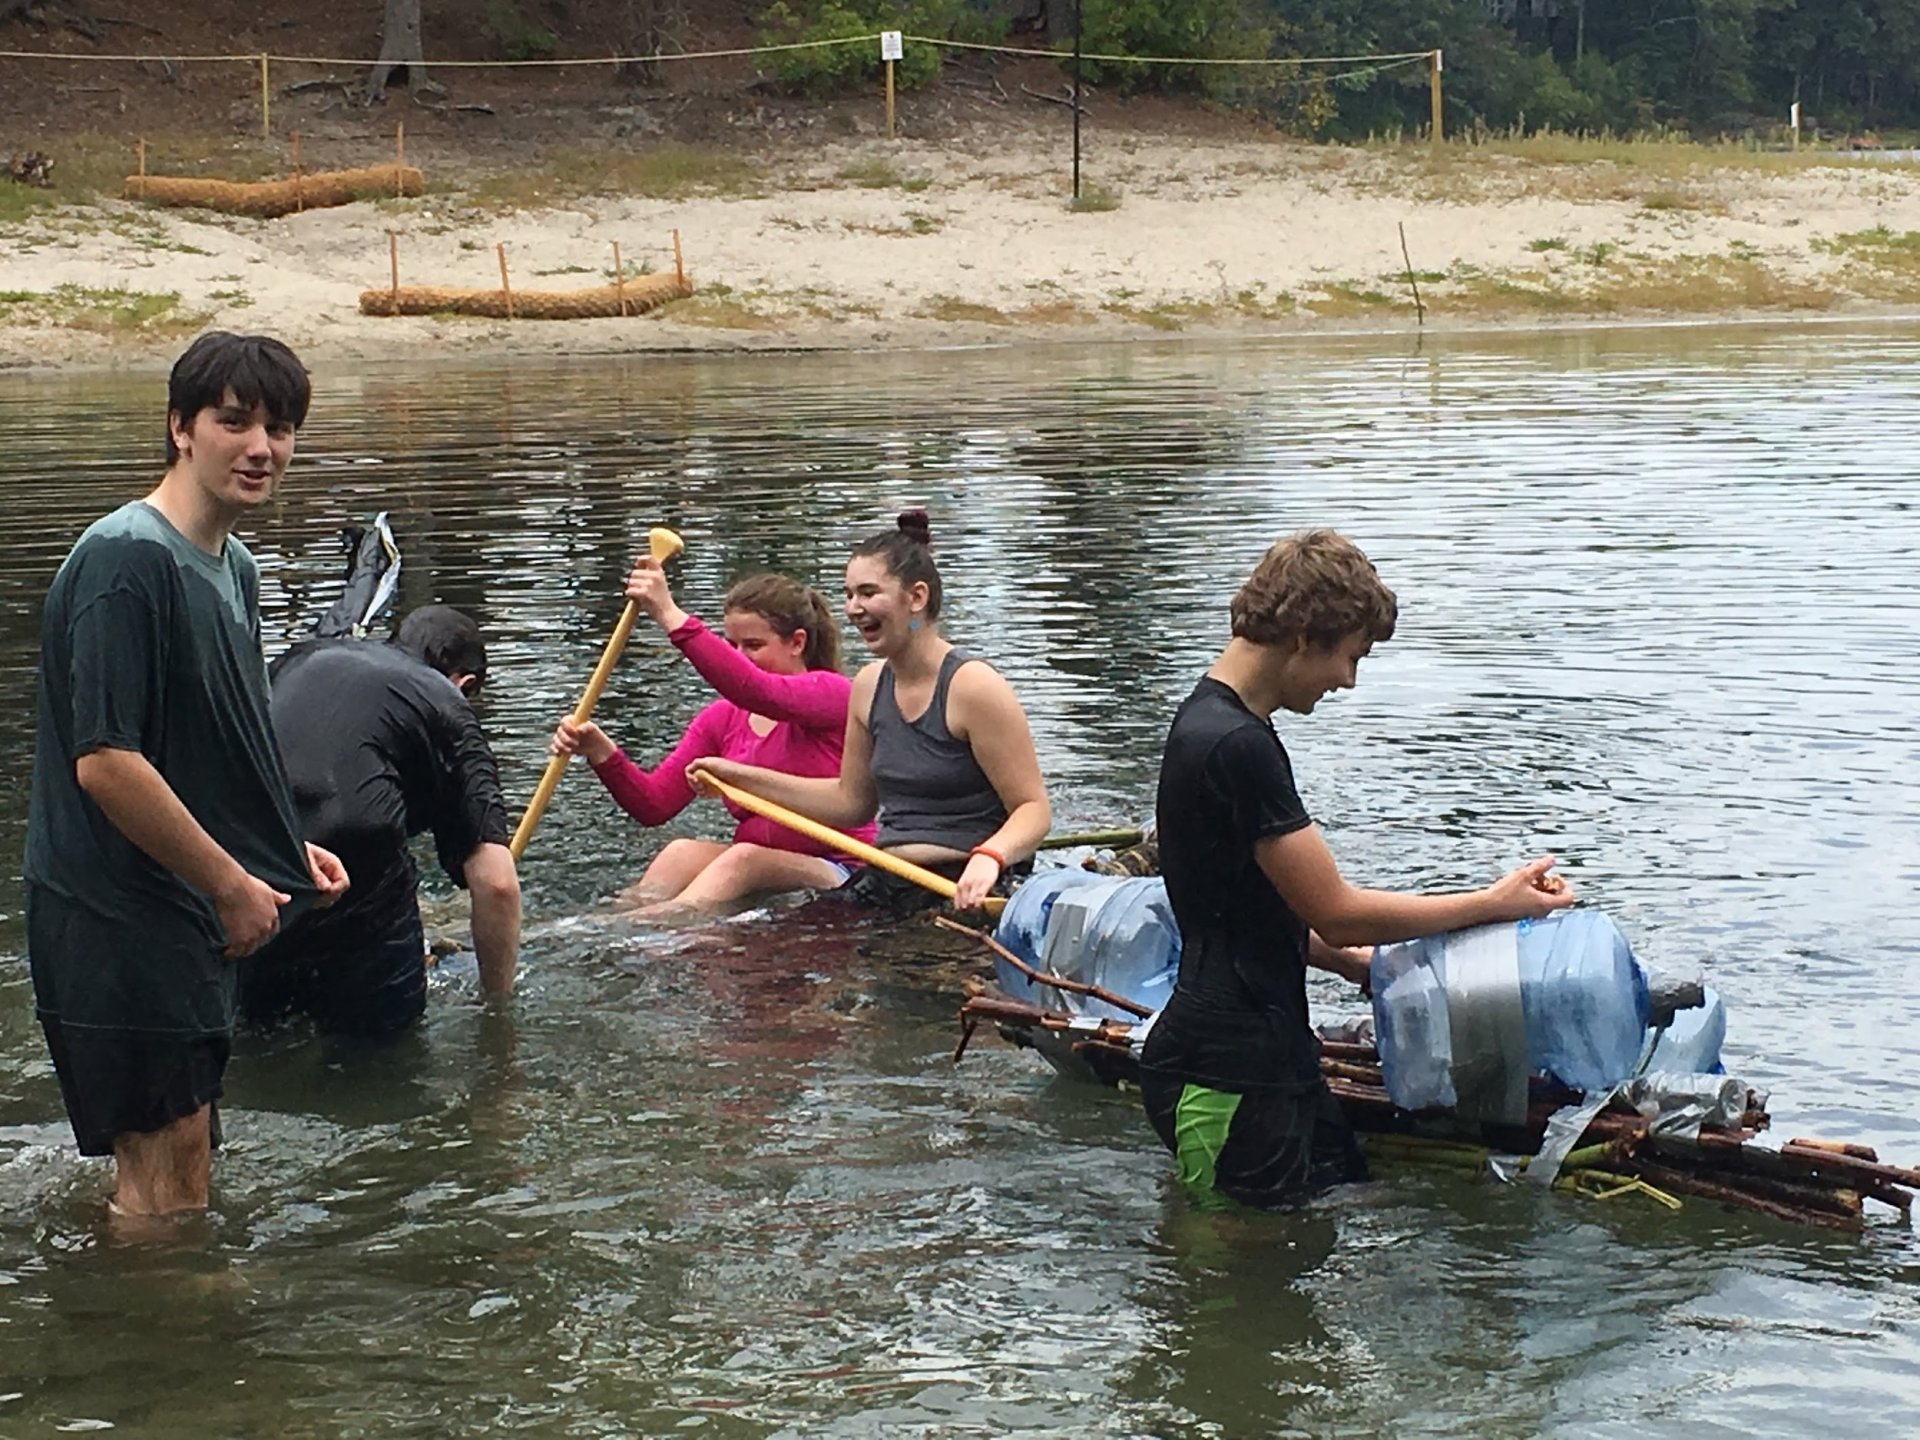 Students in lake on homemade raft made of recycled bottles